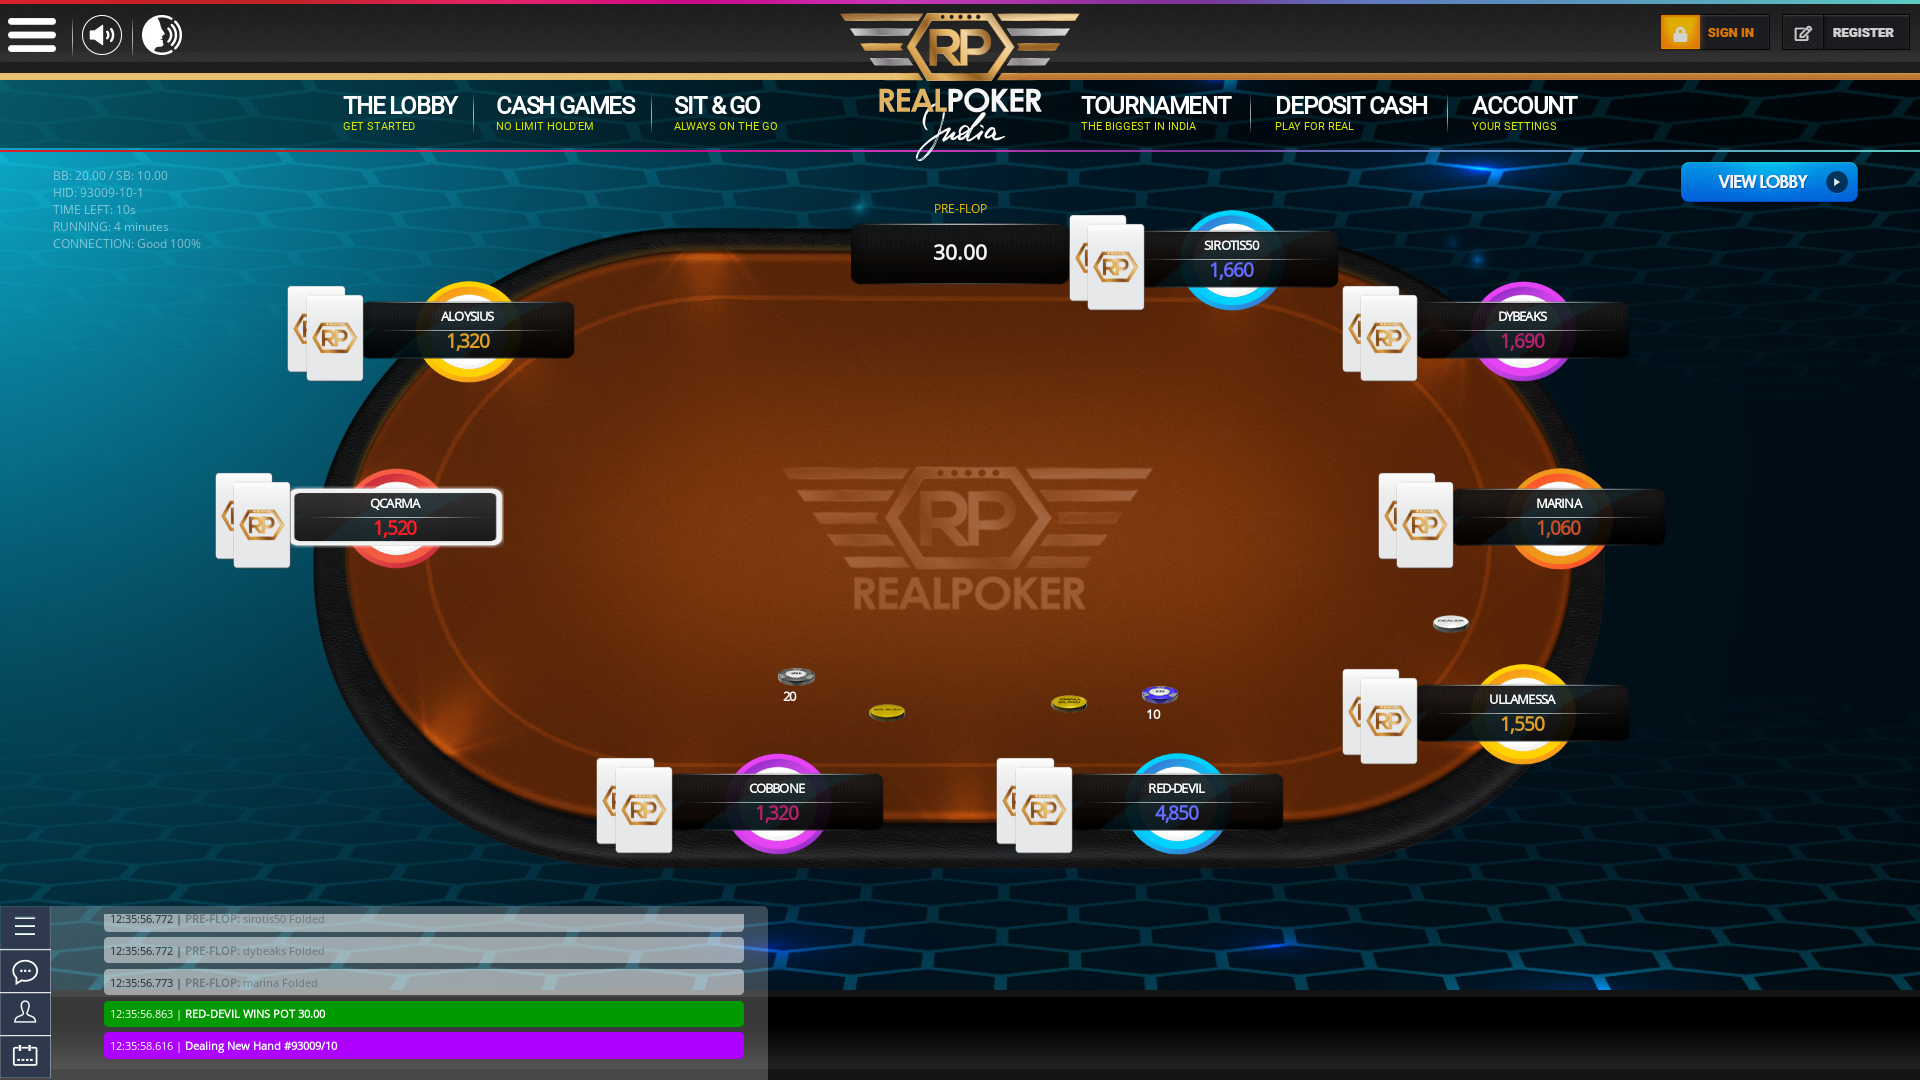 10 player texas holdem table at real poker with the table id 93009